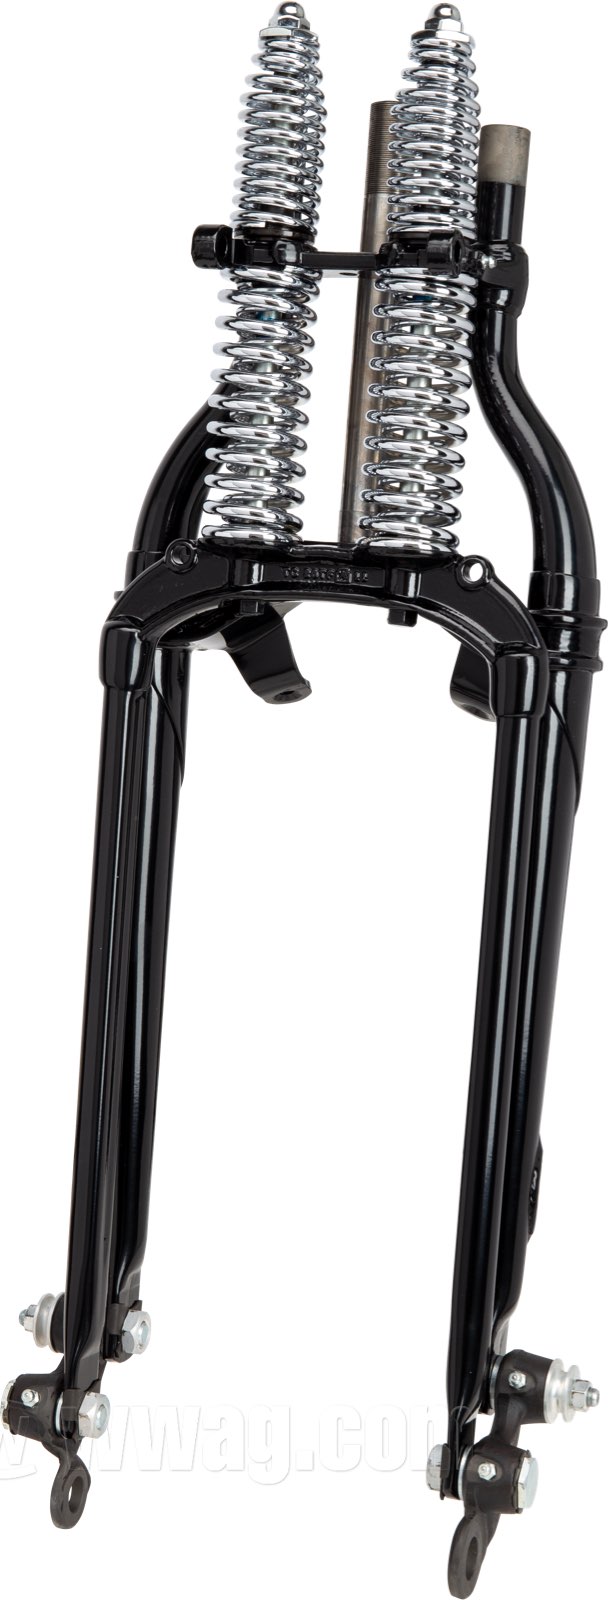 W&W Cycles - Classic Springer Forks for Harley-Davidson